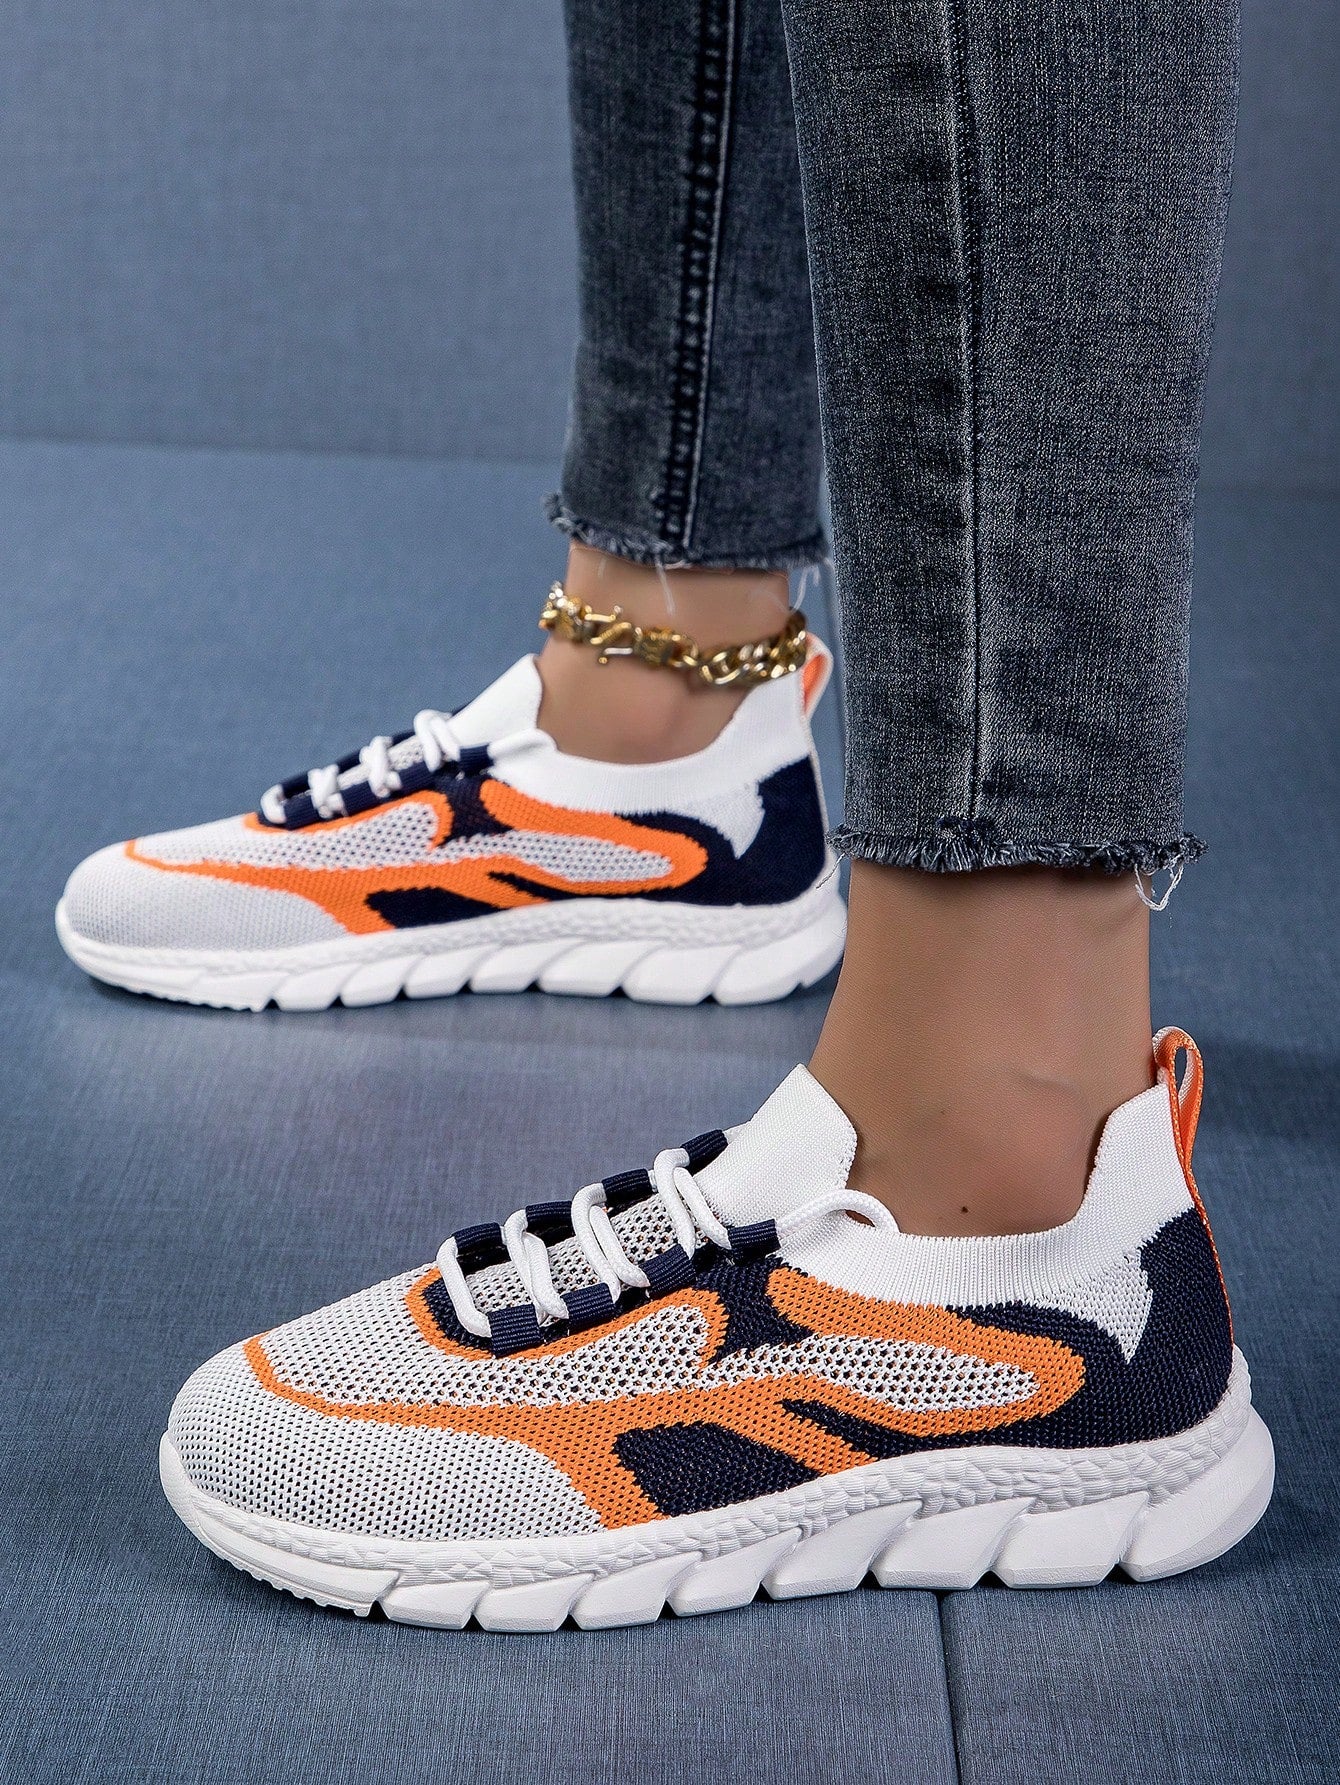 Women's Casual Running Shoes, New Spring And Autumn Soft Sole Color Block Breathable Casual Shoes, All-Match Sports Shoes, Personality Trendy Fashion, Slip-Resistant, Odor-Resistant, Wear-Resistant, Lightweight, Outdoor Driving And Work Shoes,-Orange-5